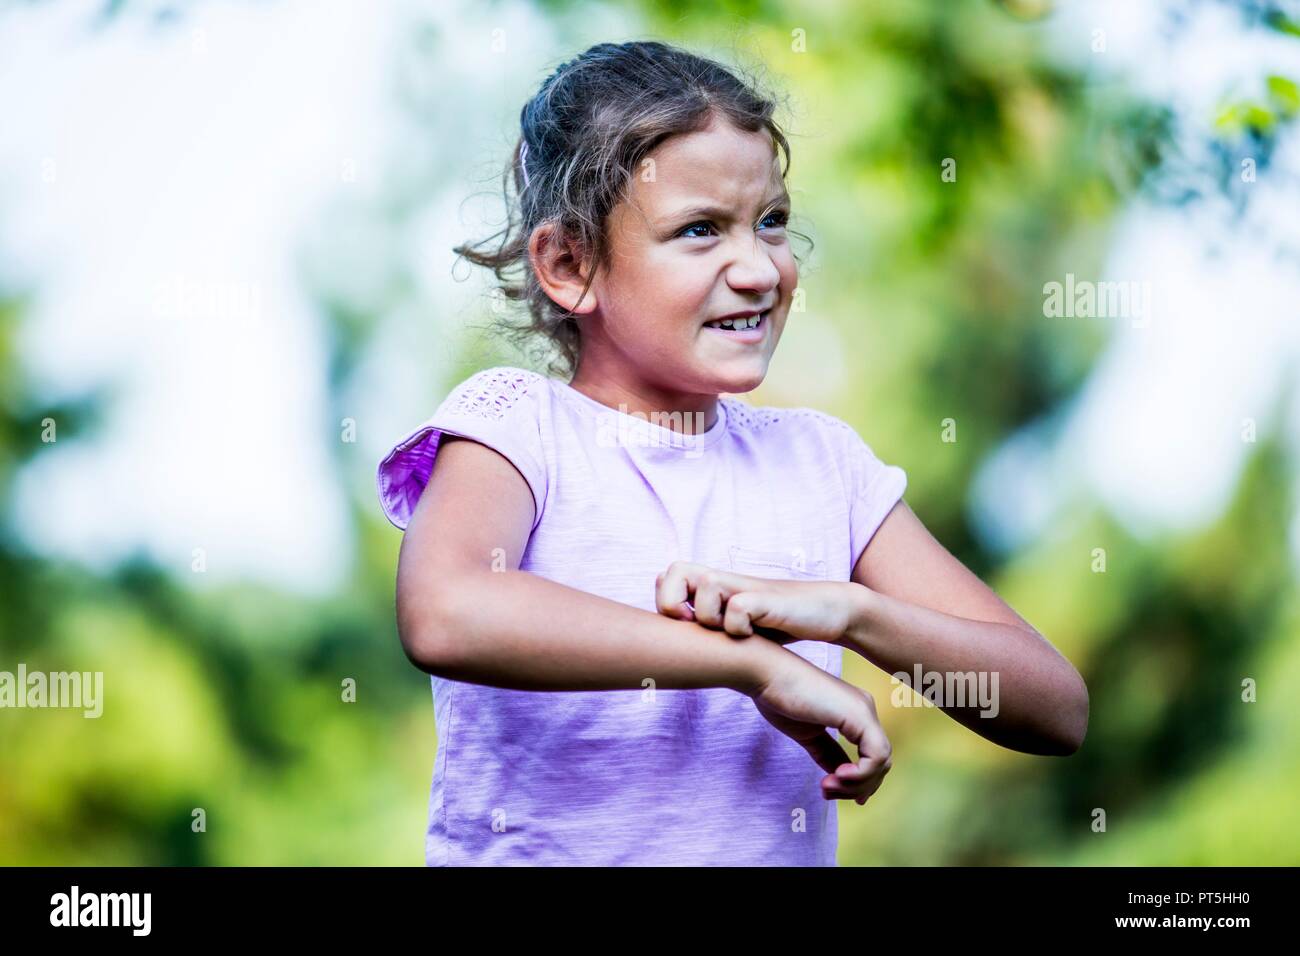 Girl scratching her hand in park. Stock Photo